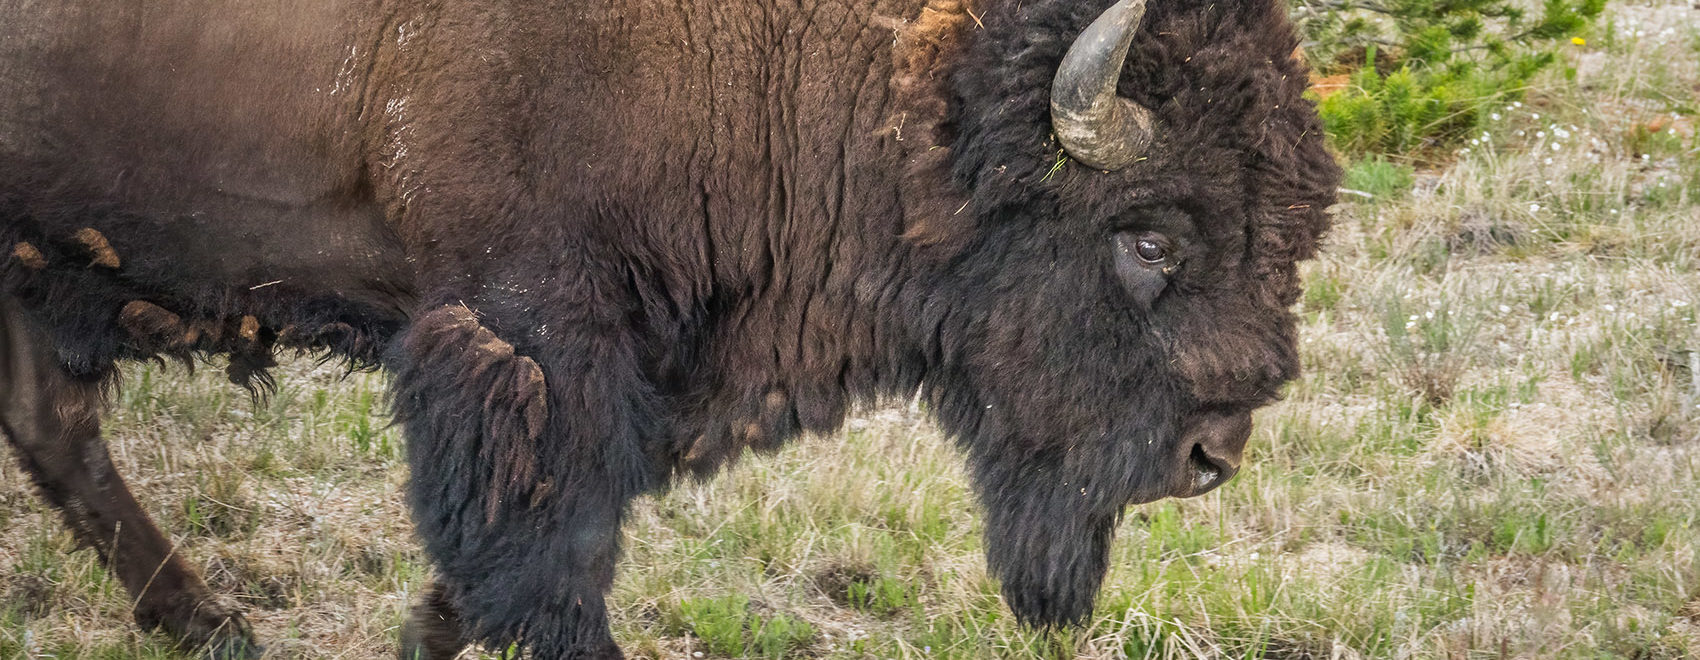 buffalo bison with horns on grass